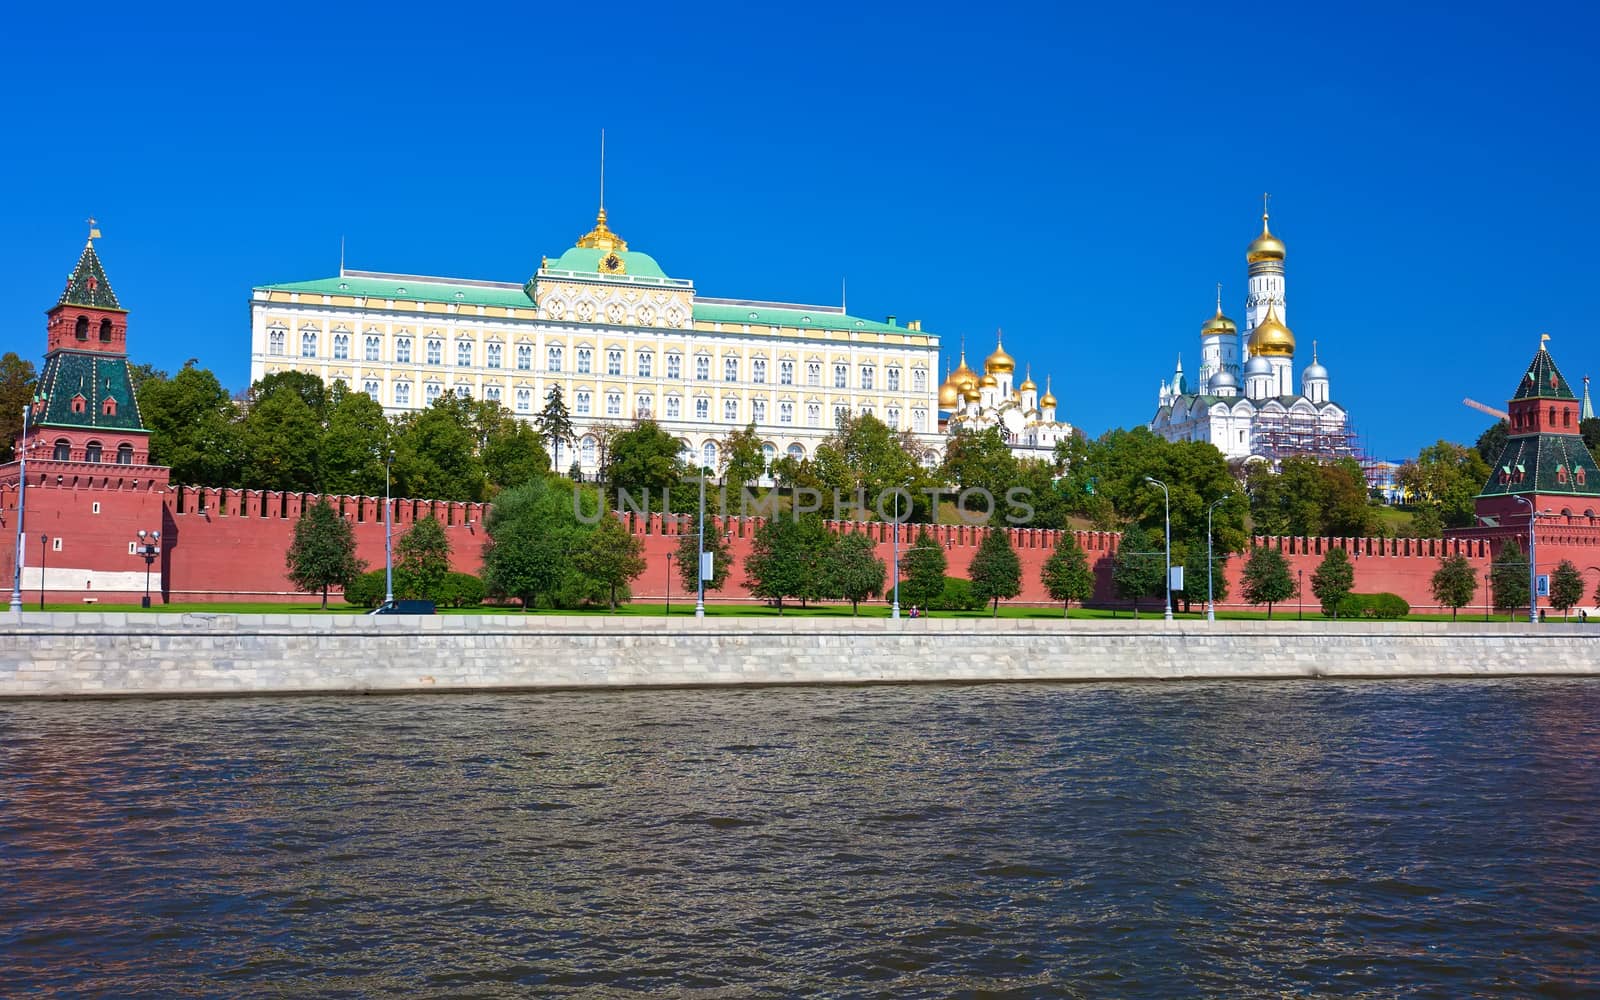 Beautiful view of  Moscow Kremlin and Moskva river, Russia